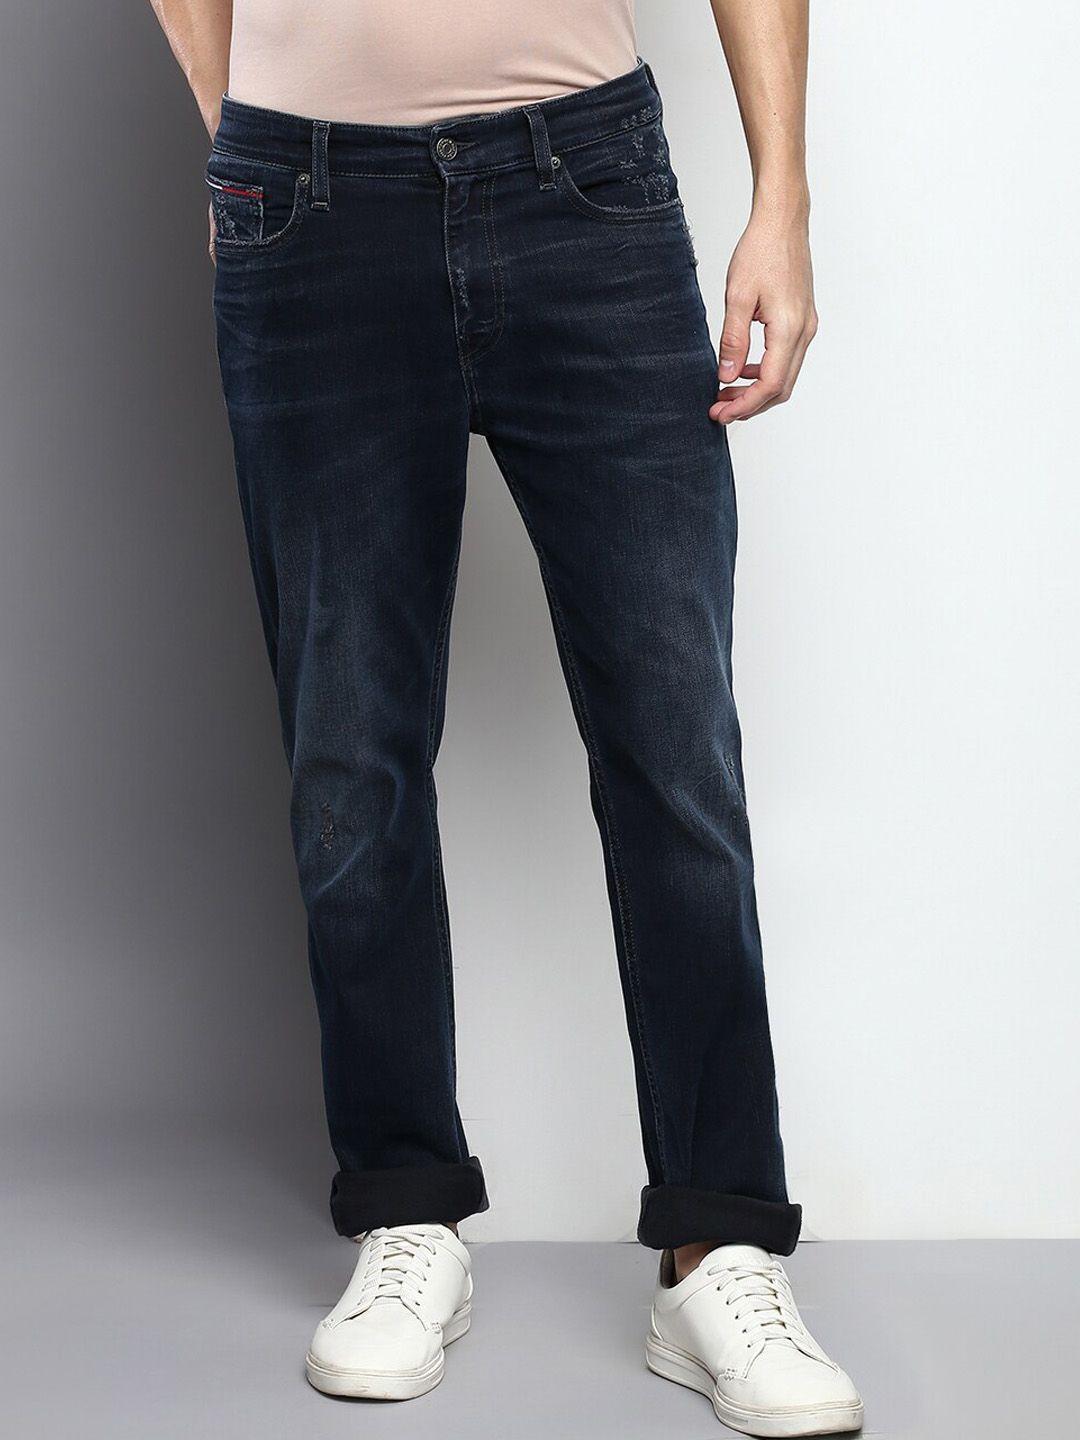 tommy-hilfiger-men-cotton-straight-fit-heavy-fade-jeans